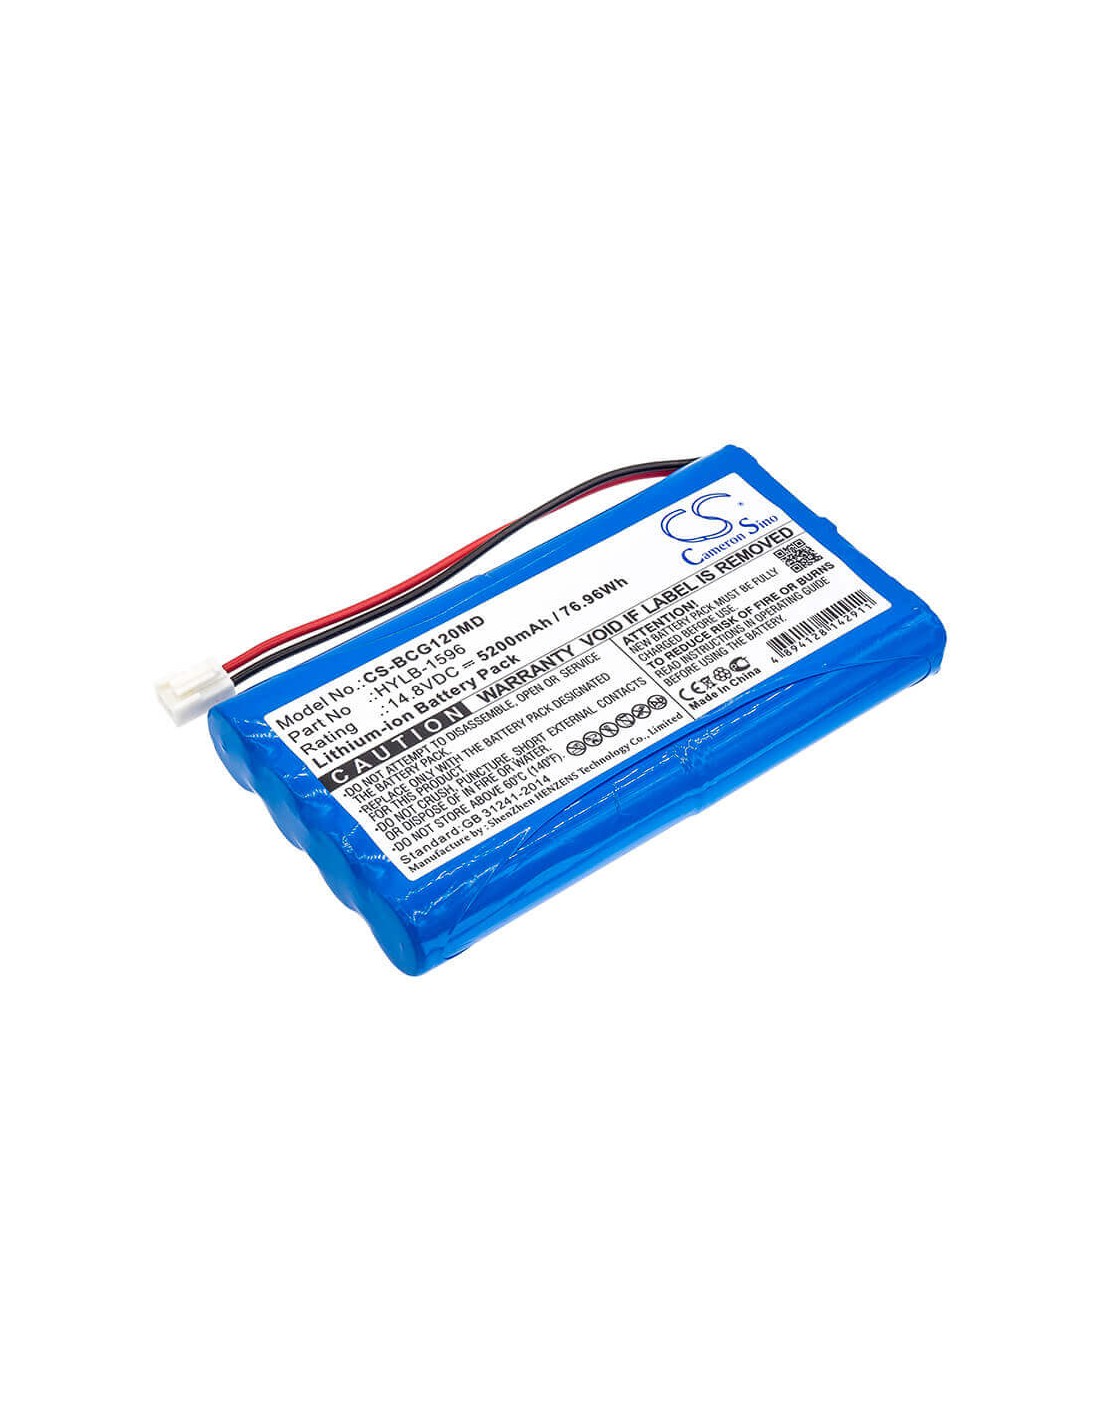 Battery for Biocare, Ie12, Ie12a 14.8V, 5200mAh - 76.96Wh